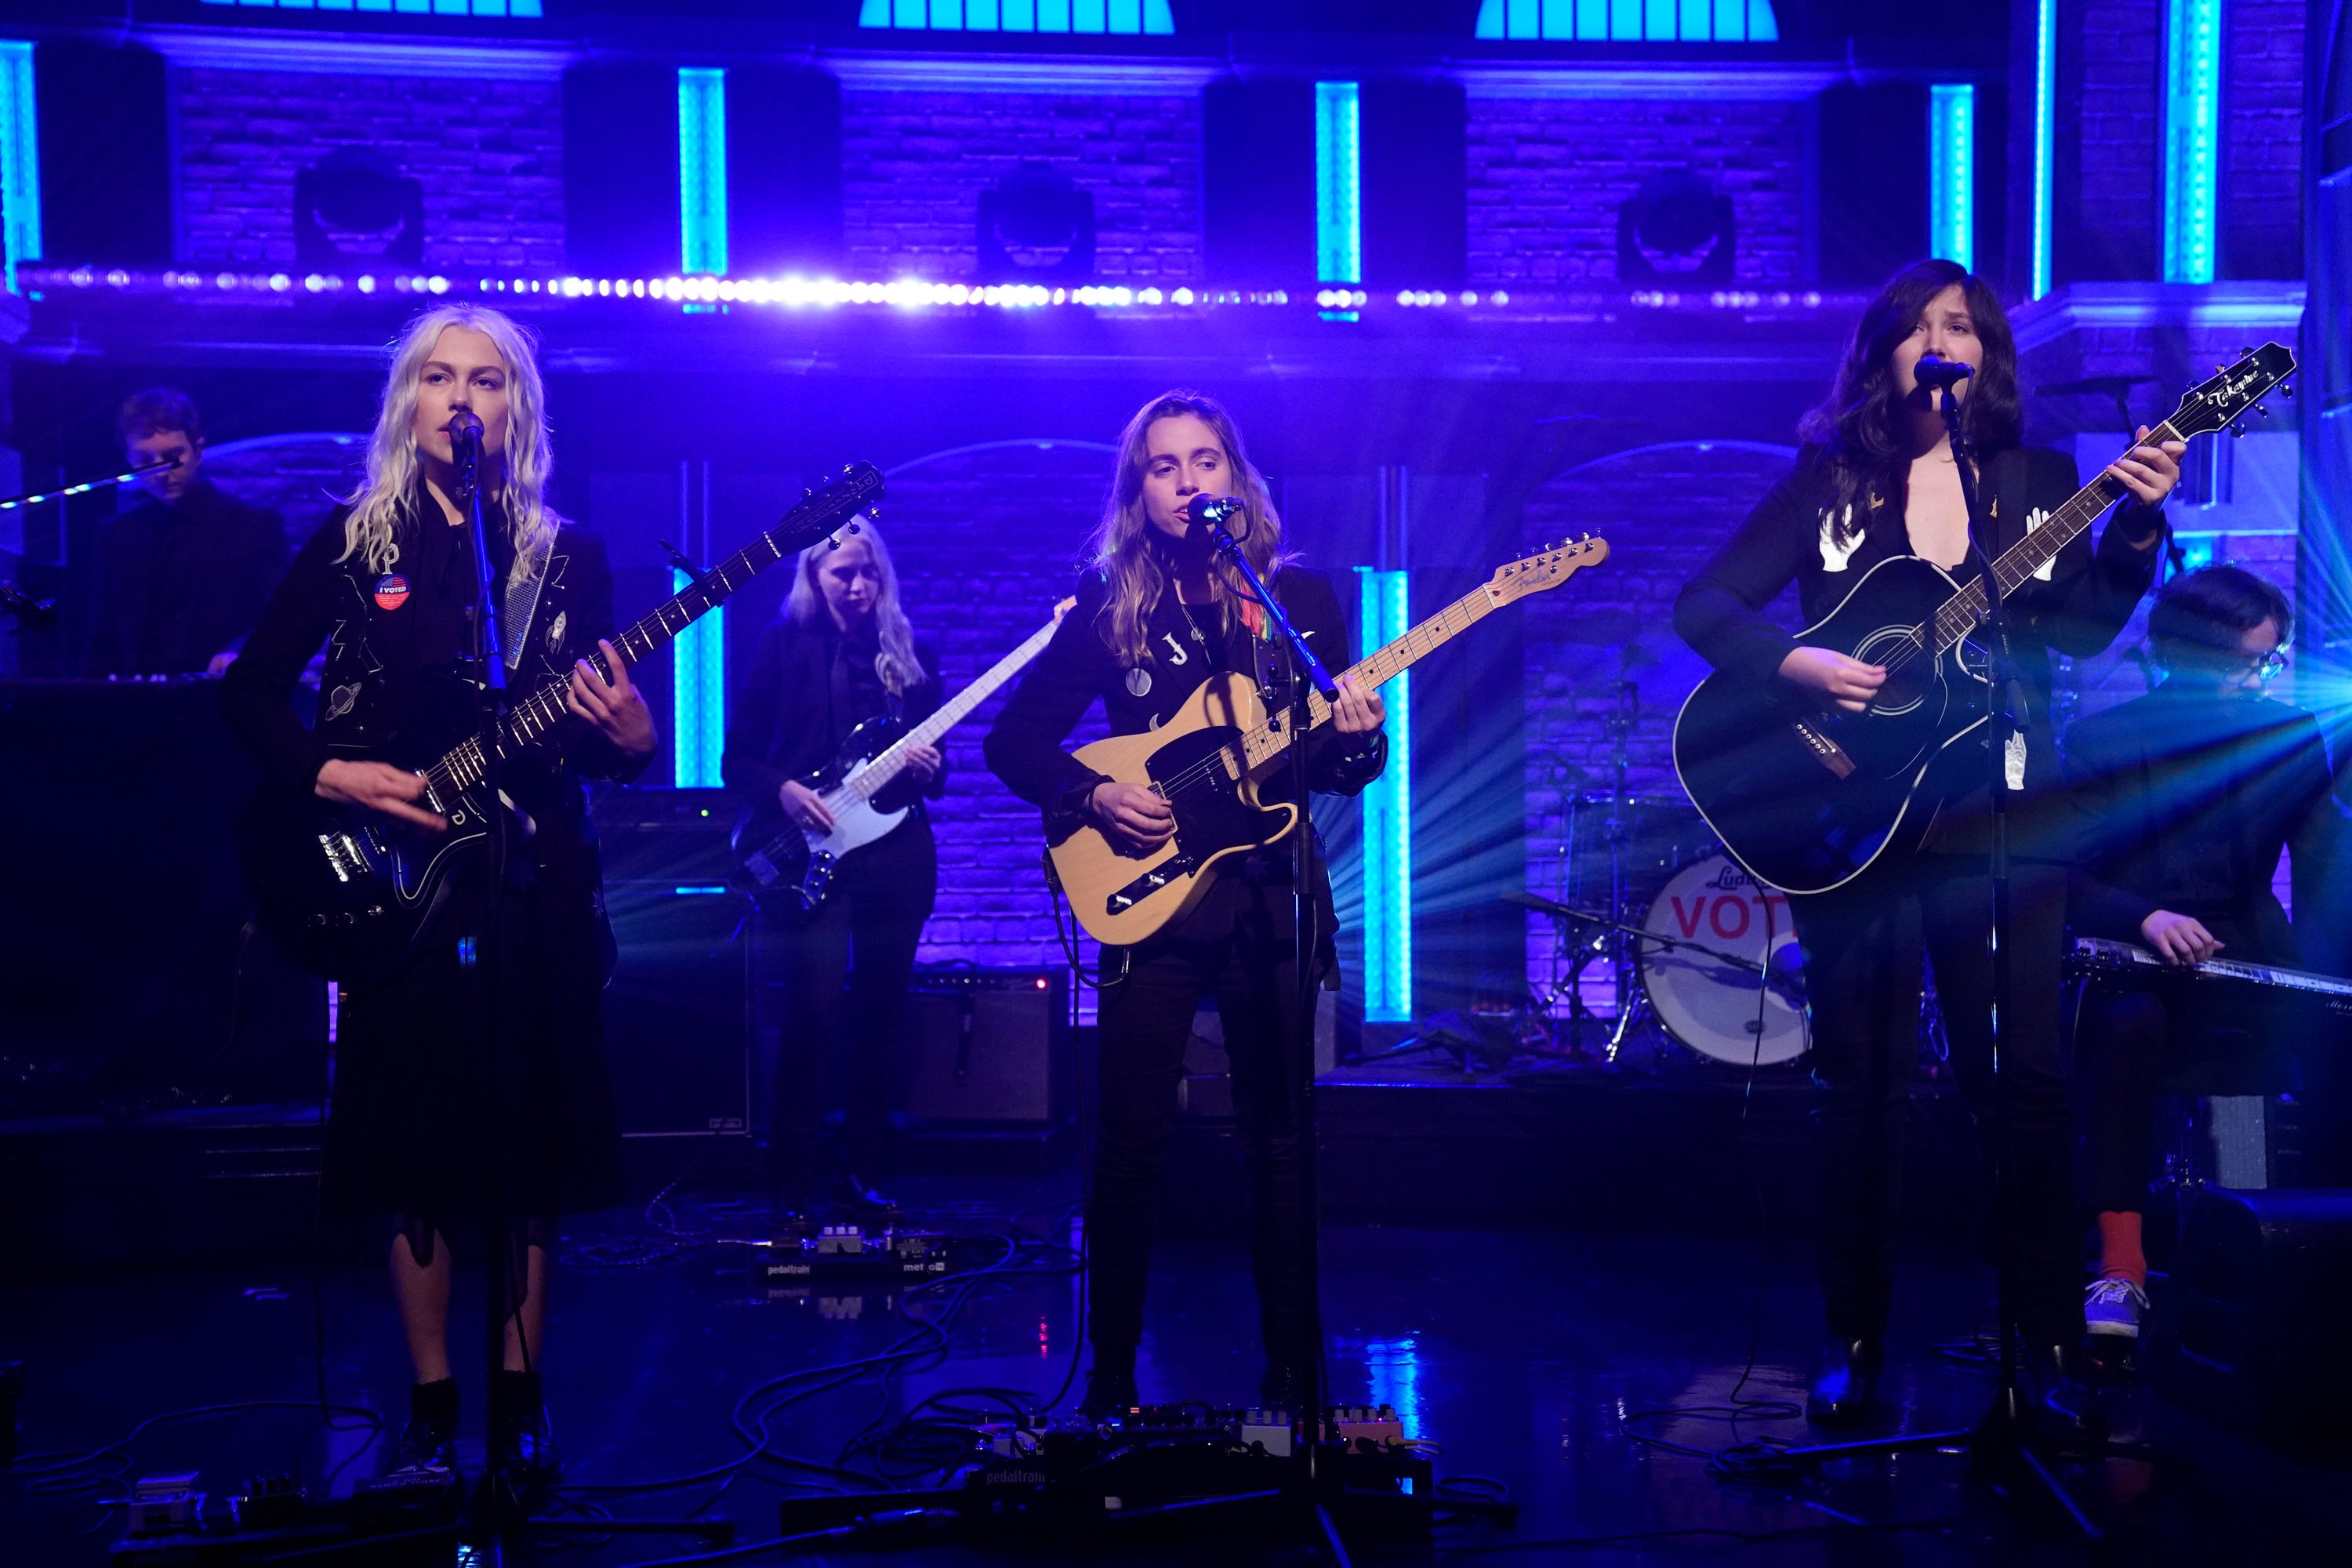 Phoebe Bridgers, Julien Baker and Lucy Dacus of boygenius perform on 'Late Night with Seth Meyers'